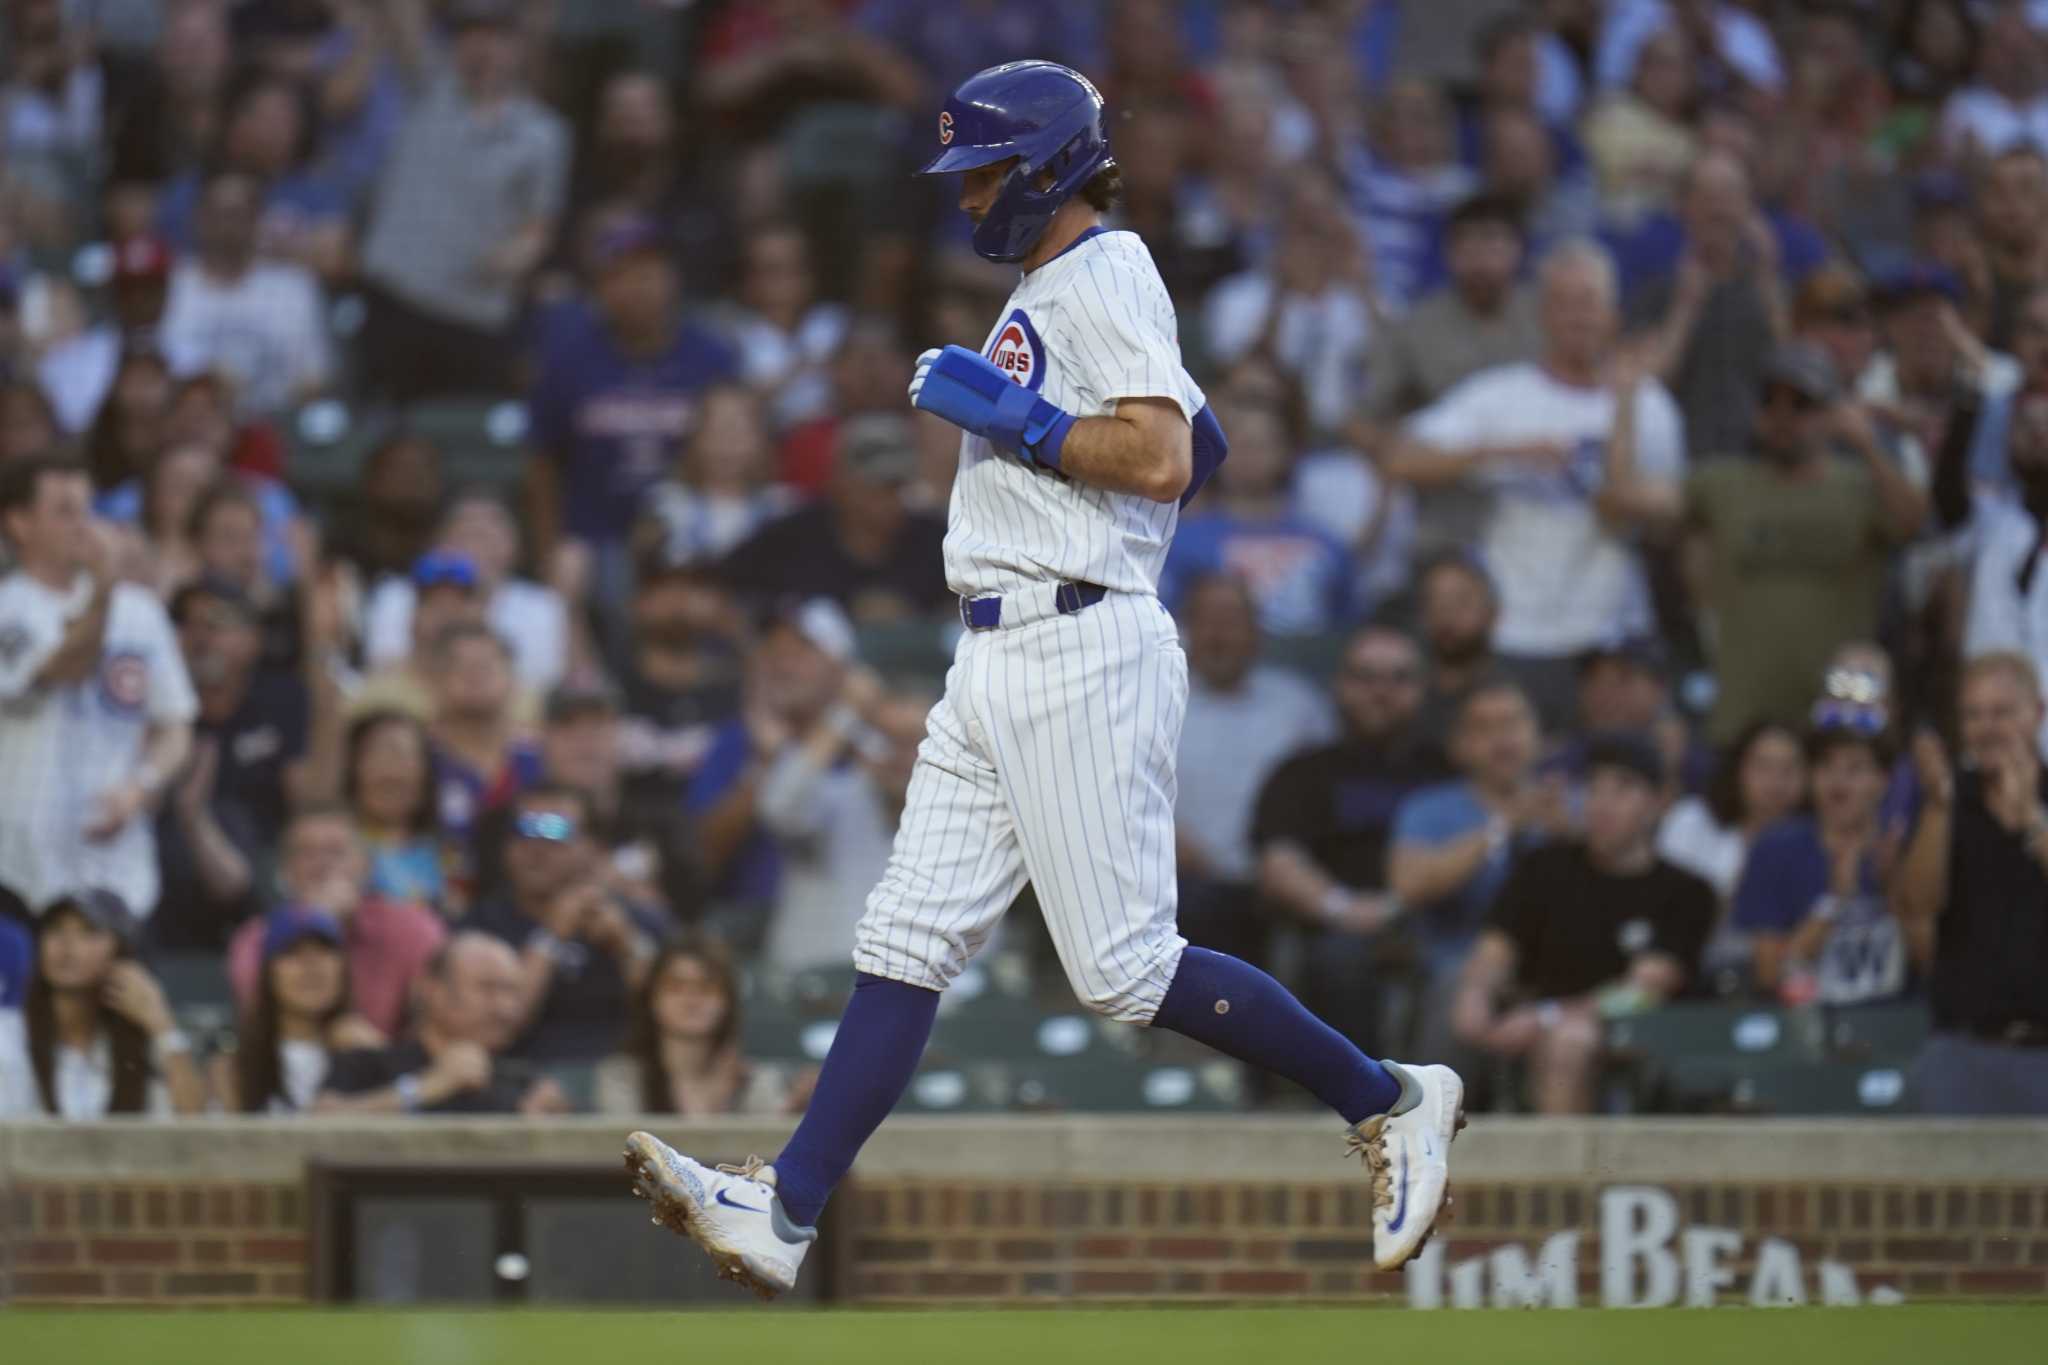 Hoerner hits game-ending single in 10th inning as the Cubs beat the Braves 4-3